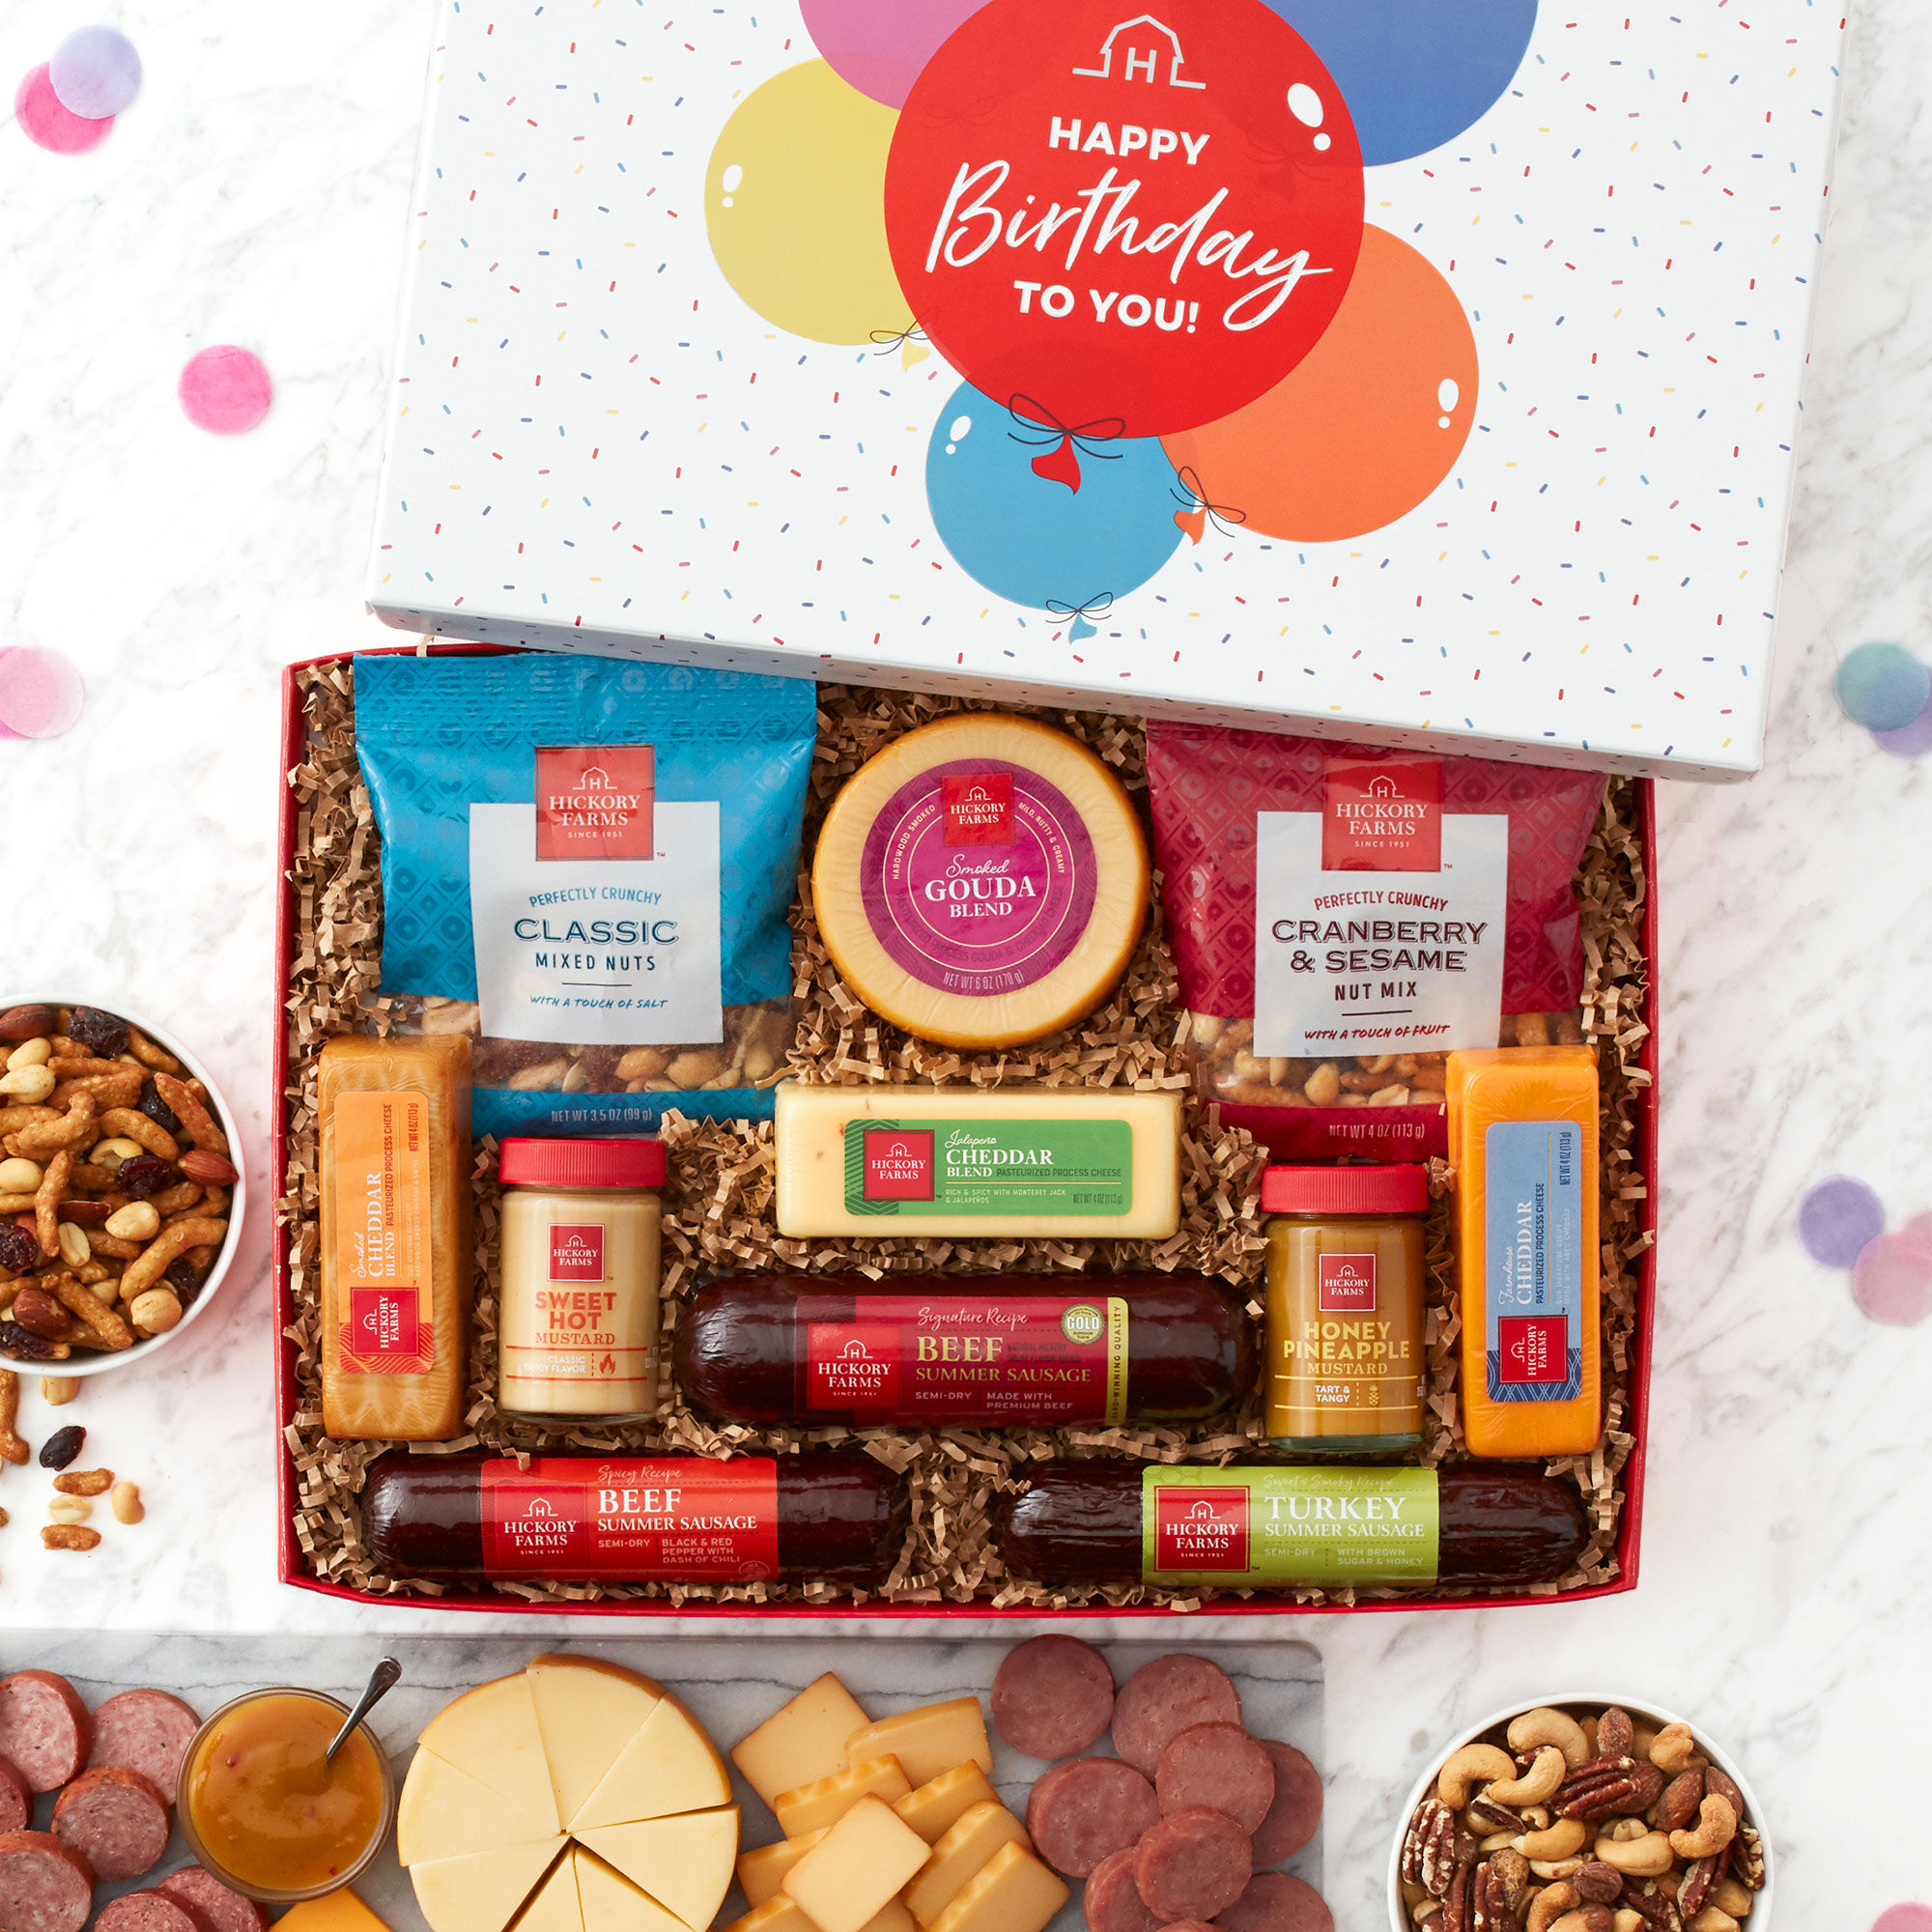 Birthday Gift Baskets | Healthy food and wine gifts, USA Delivery - Good 4  You Gift Baskets USA